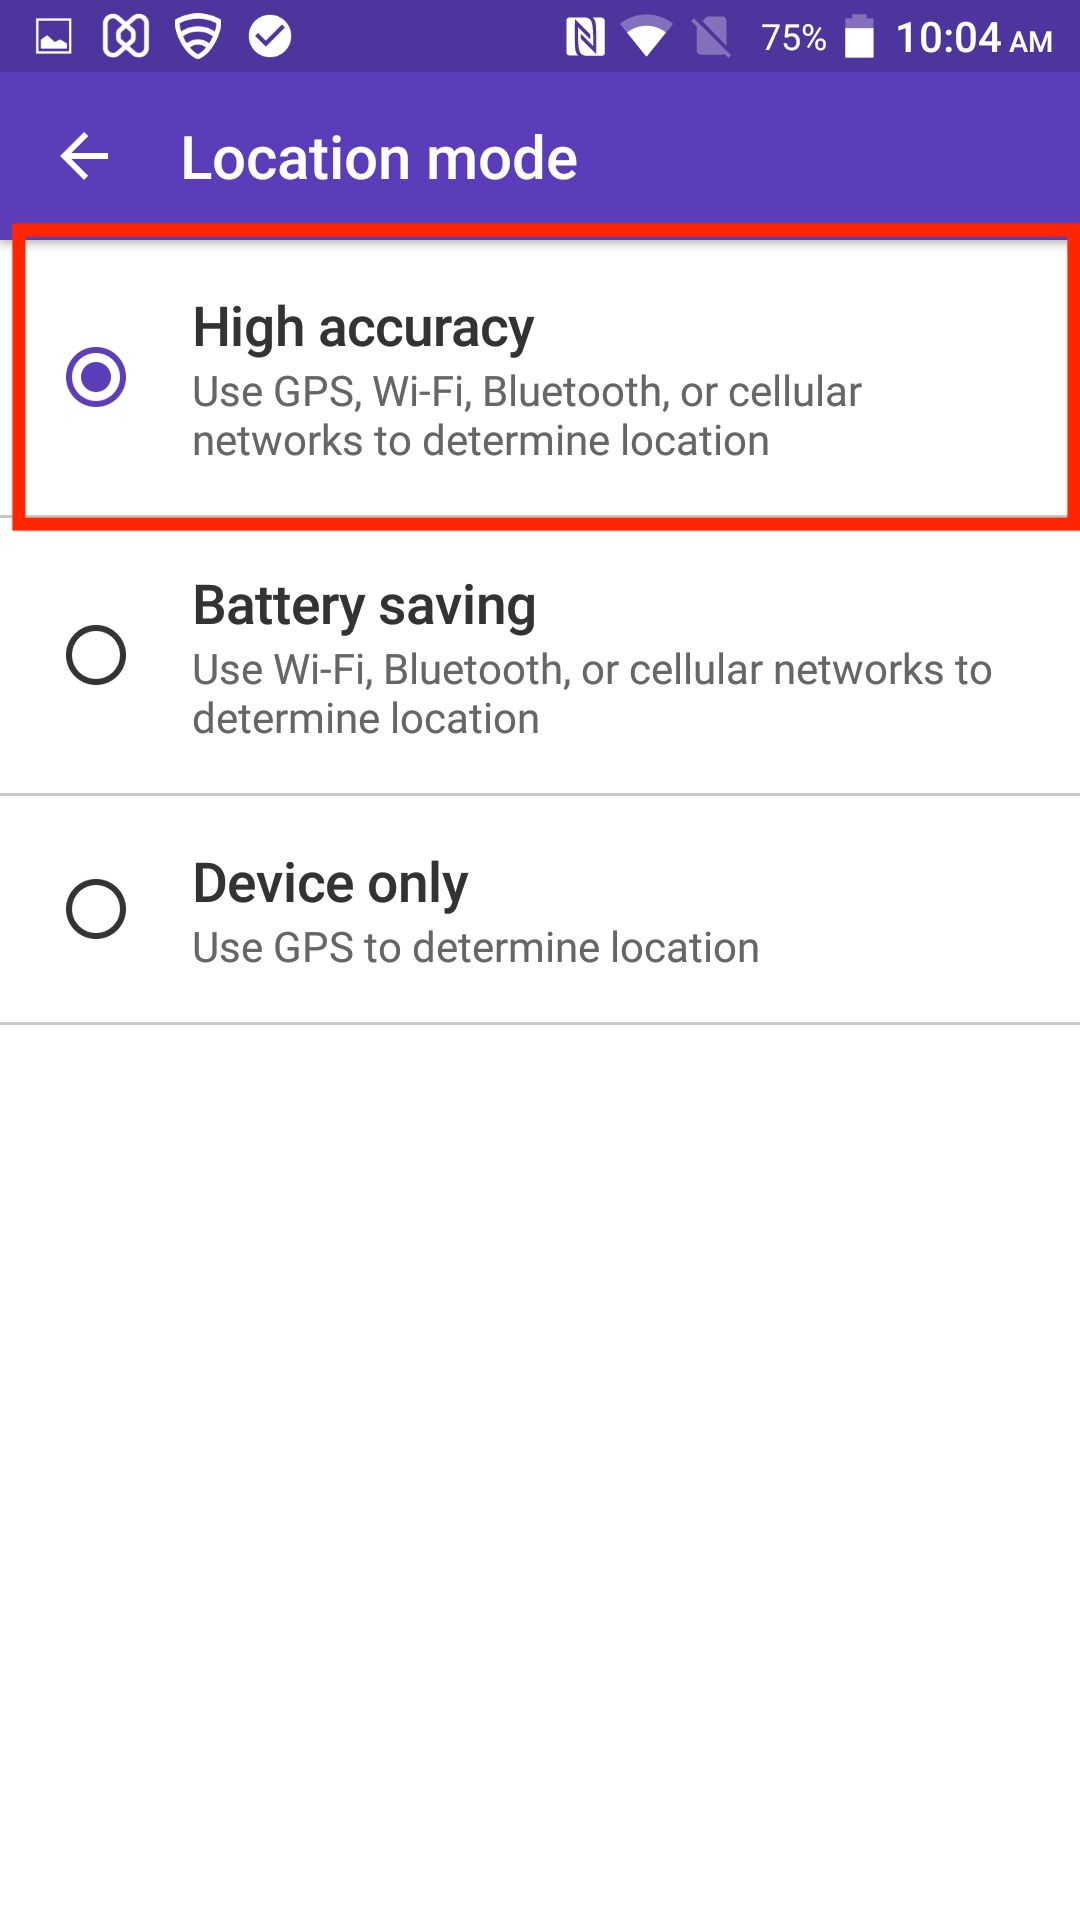 Set Location mode to High accuracy to pinpoint device location 